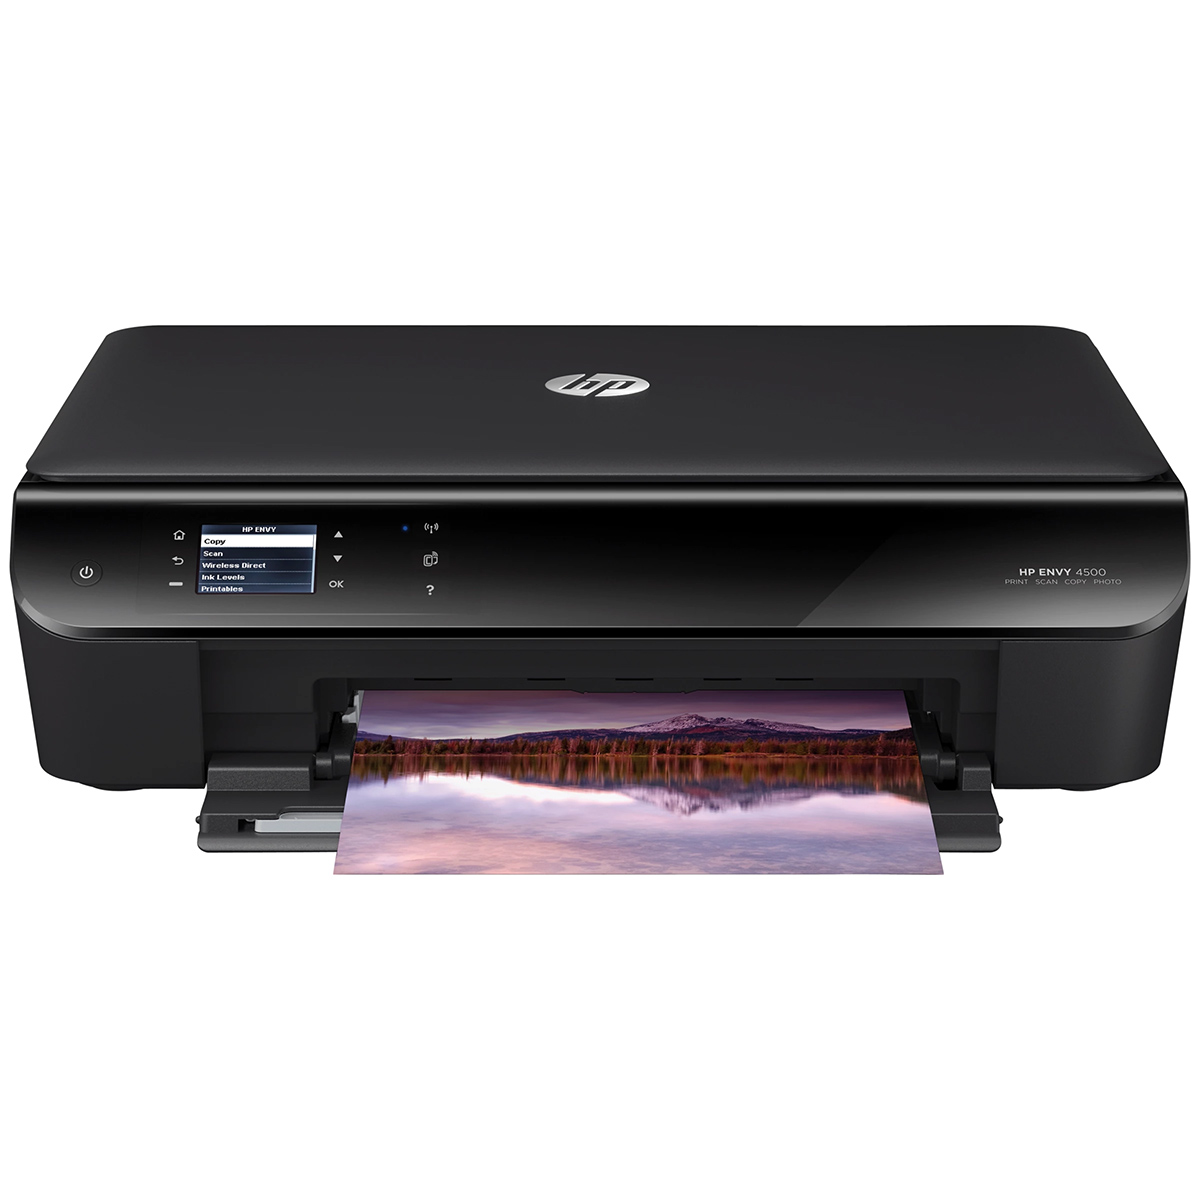 How To Install A HP Envy 4500 Printer